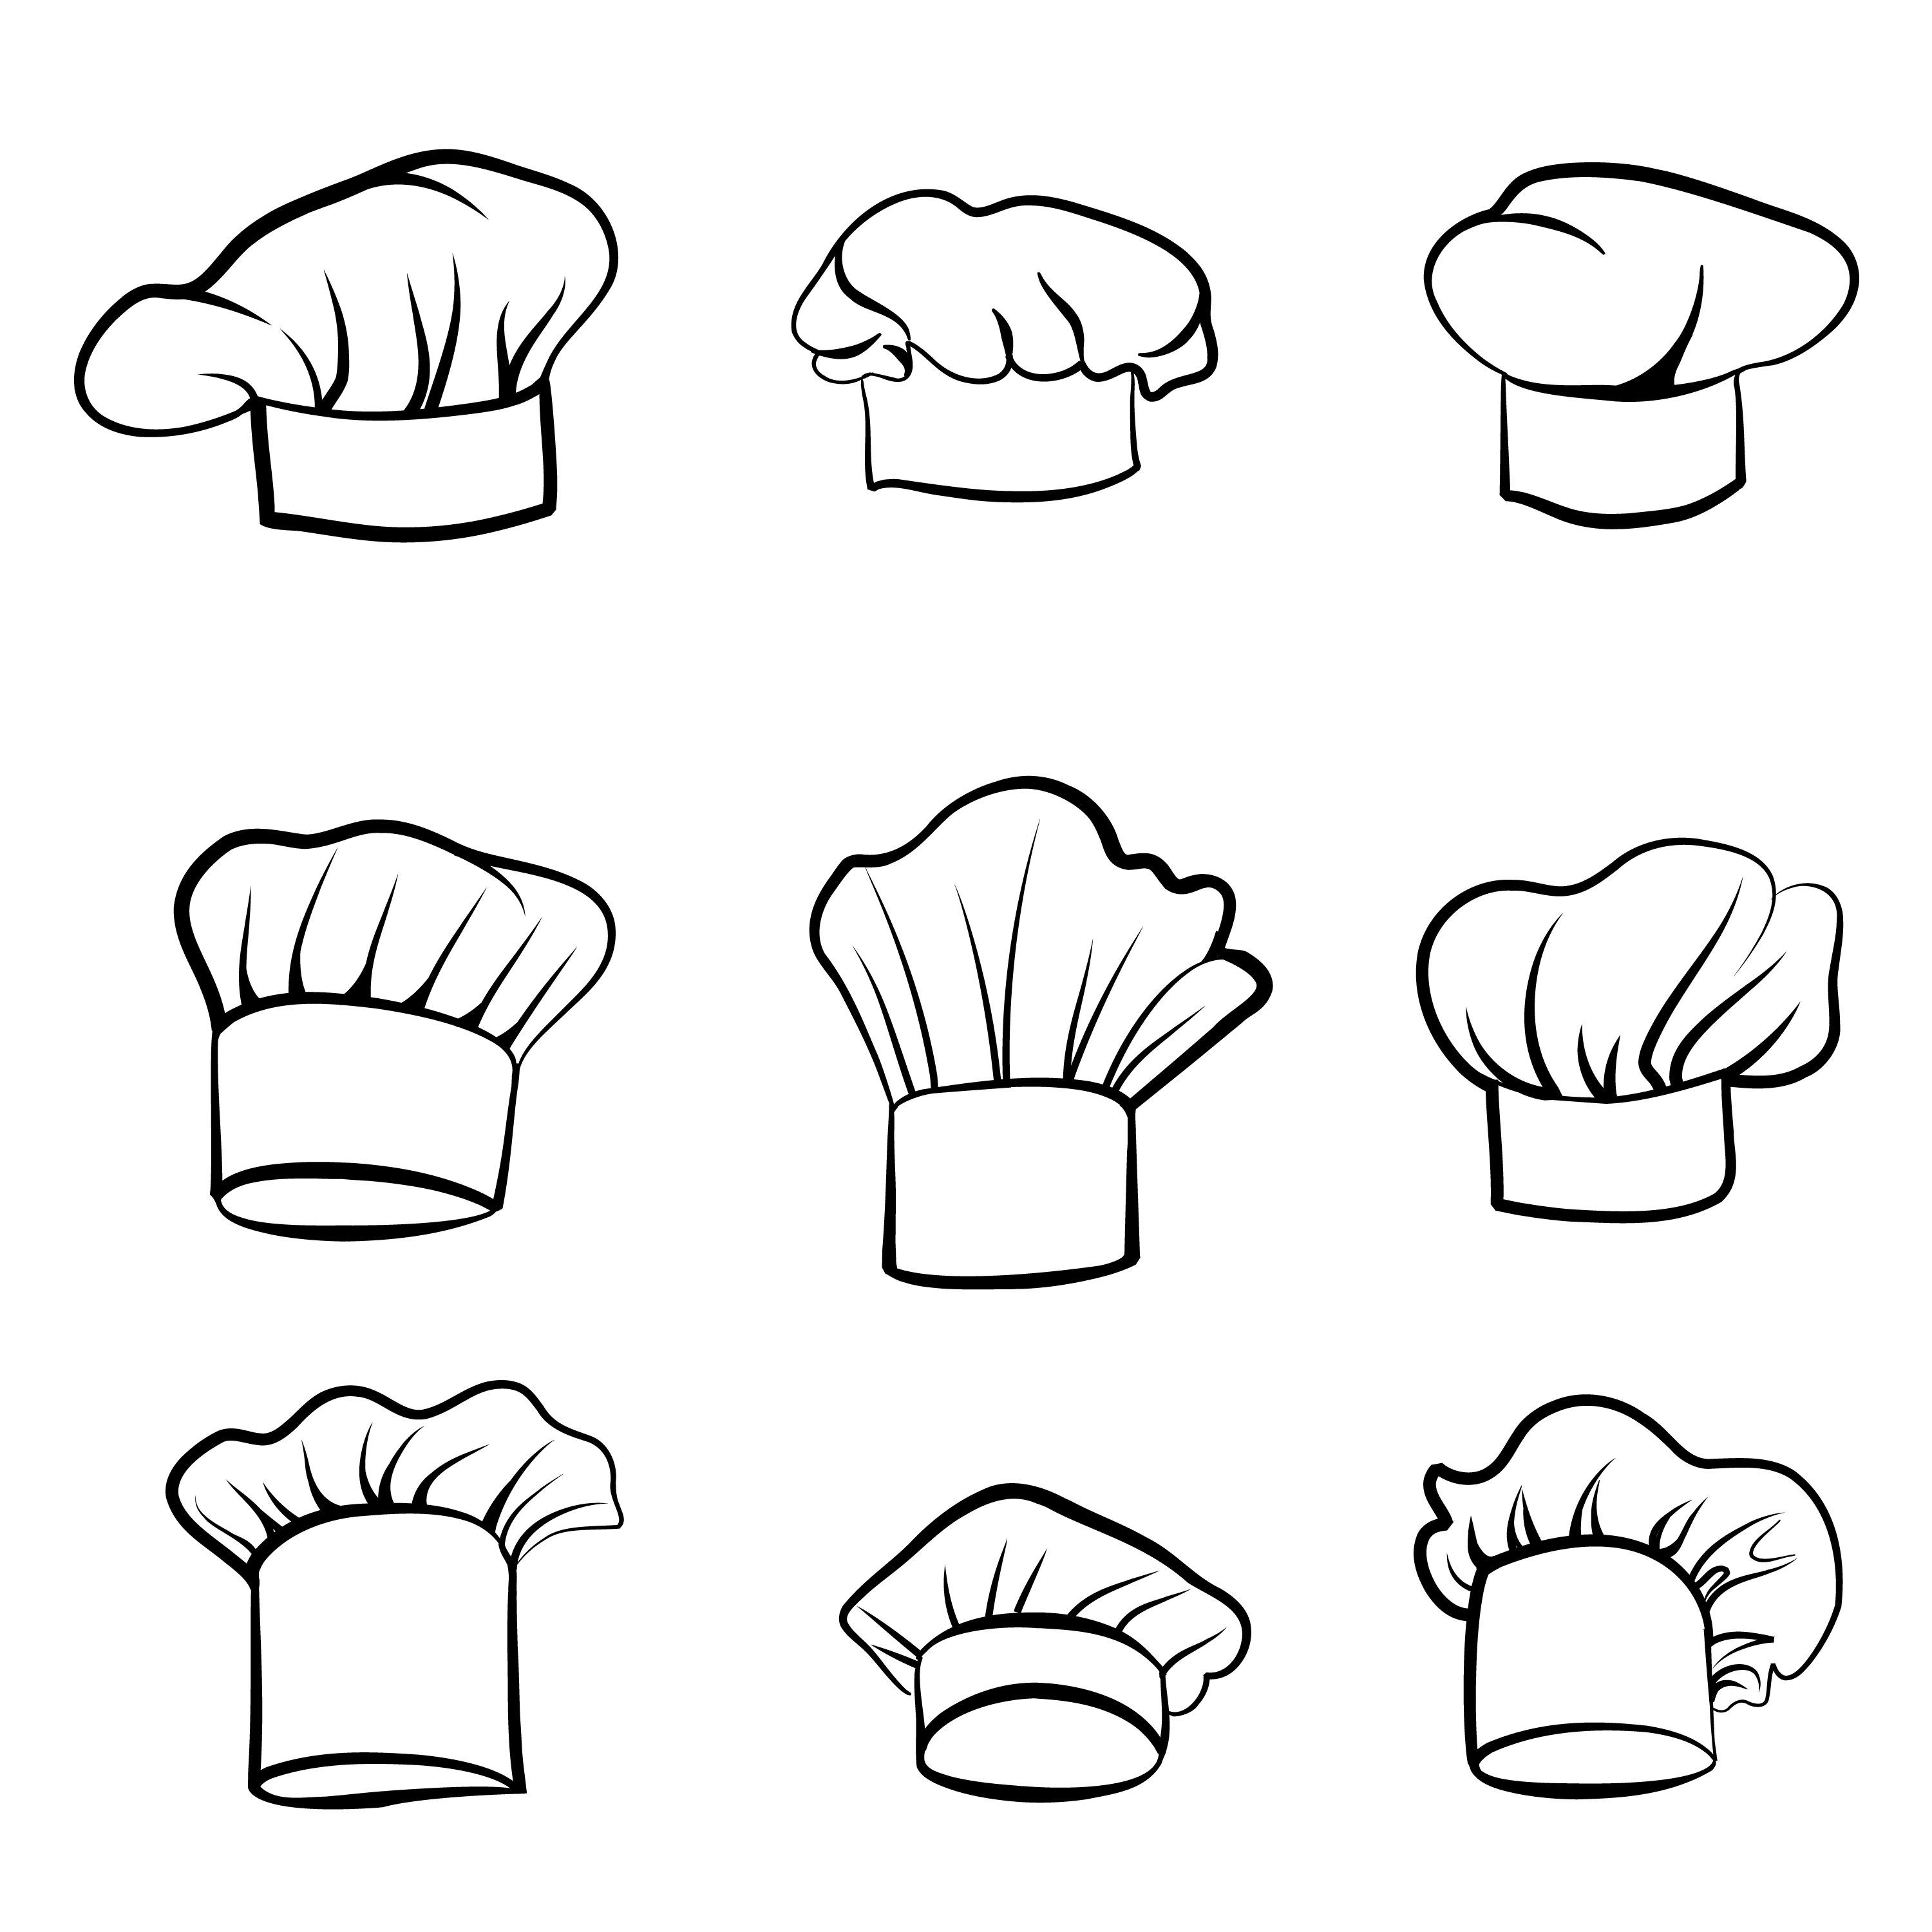 Fine chef's hat coloring page